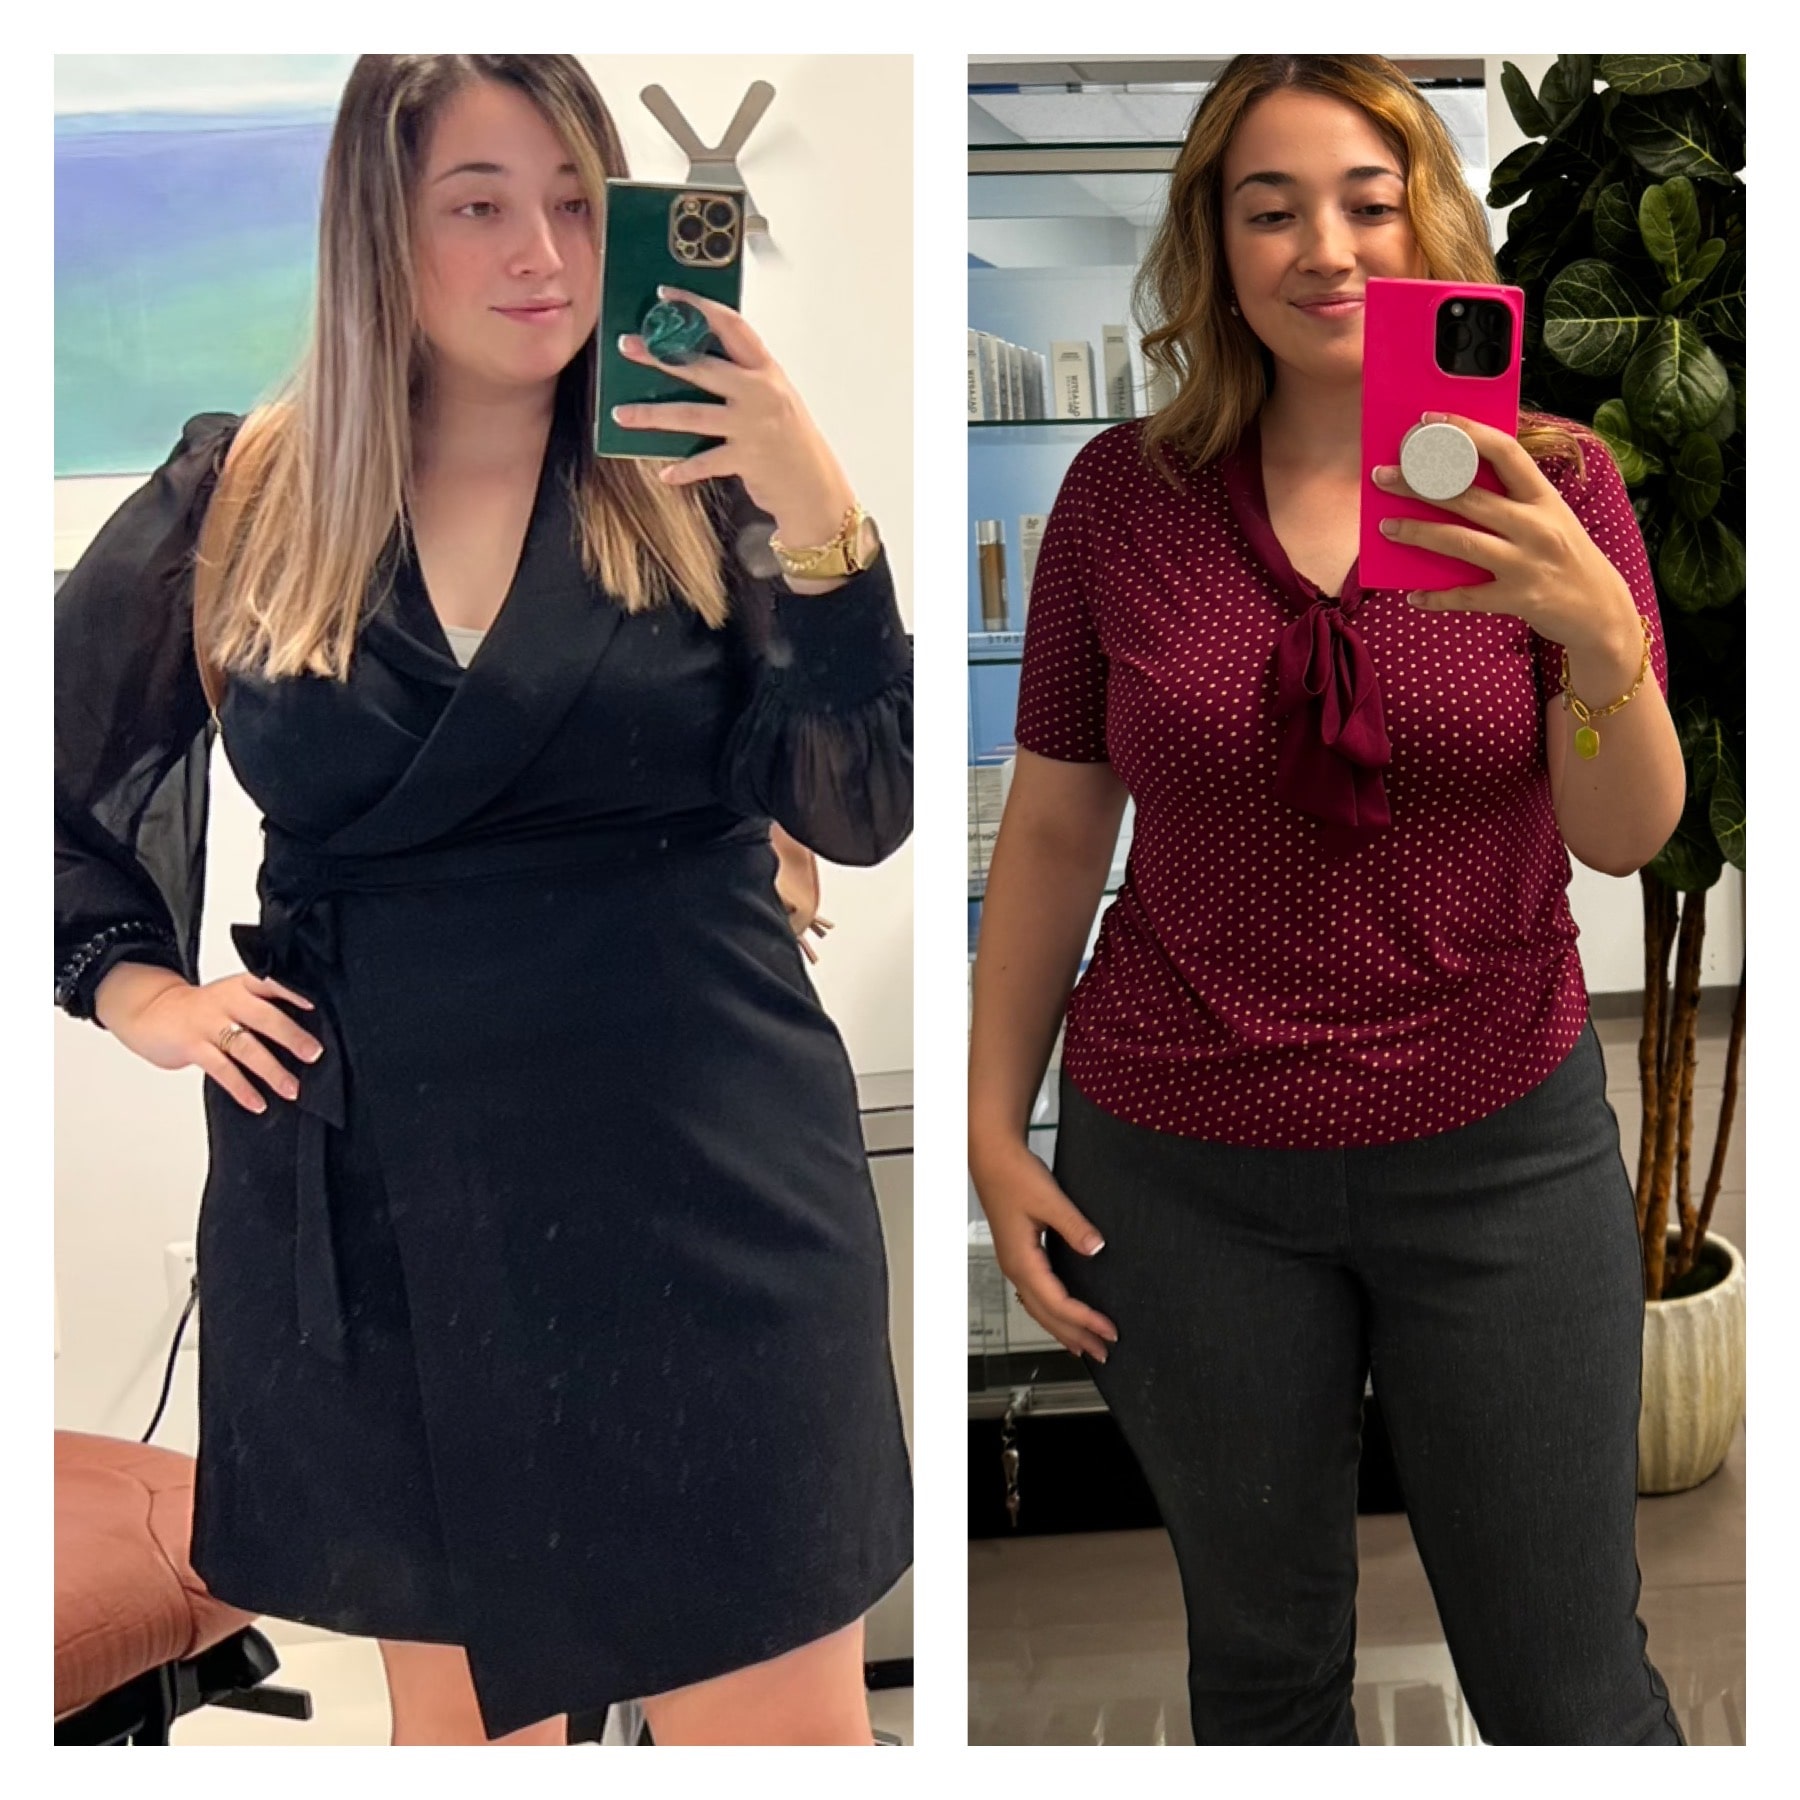 26 year-old mother before and 4 months after weekly semaglutide injections. She lost 25 pounds at a rate of 1.5 pounds per week.